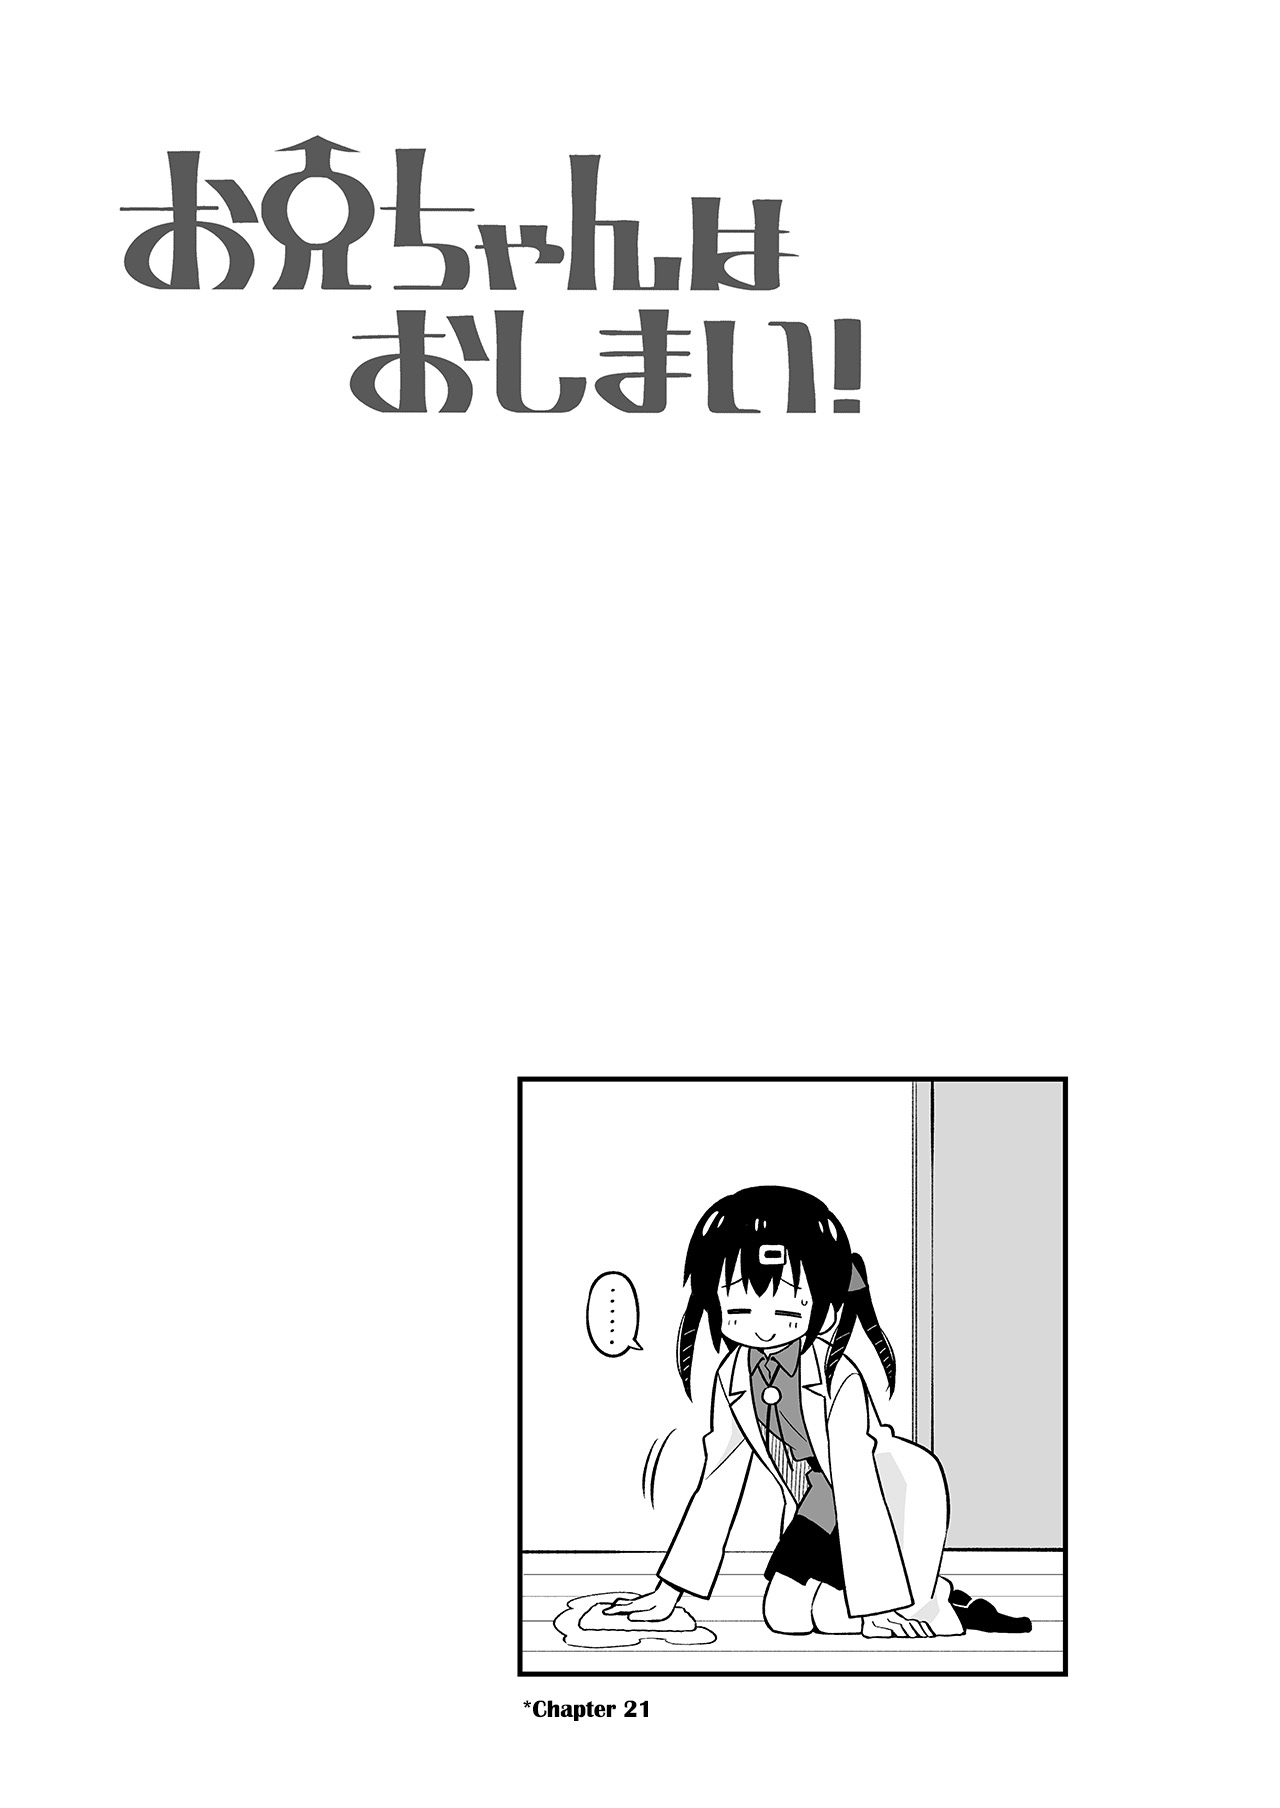 Onii chan is Done For Vol. 3 Ch. 30.9 Chapter 21 27 Mini Extras [Partial]